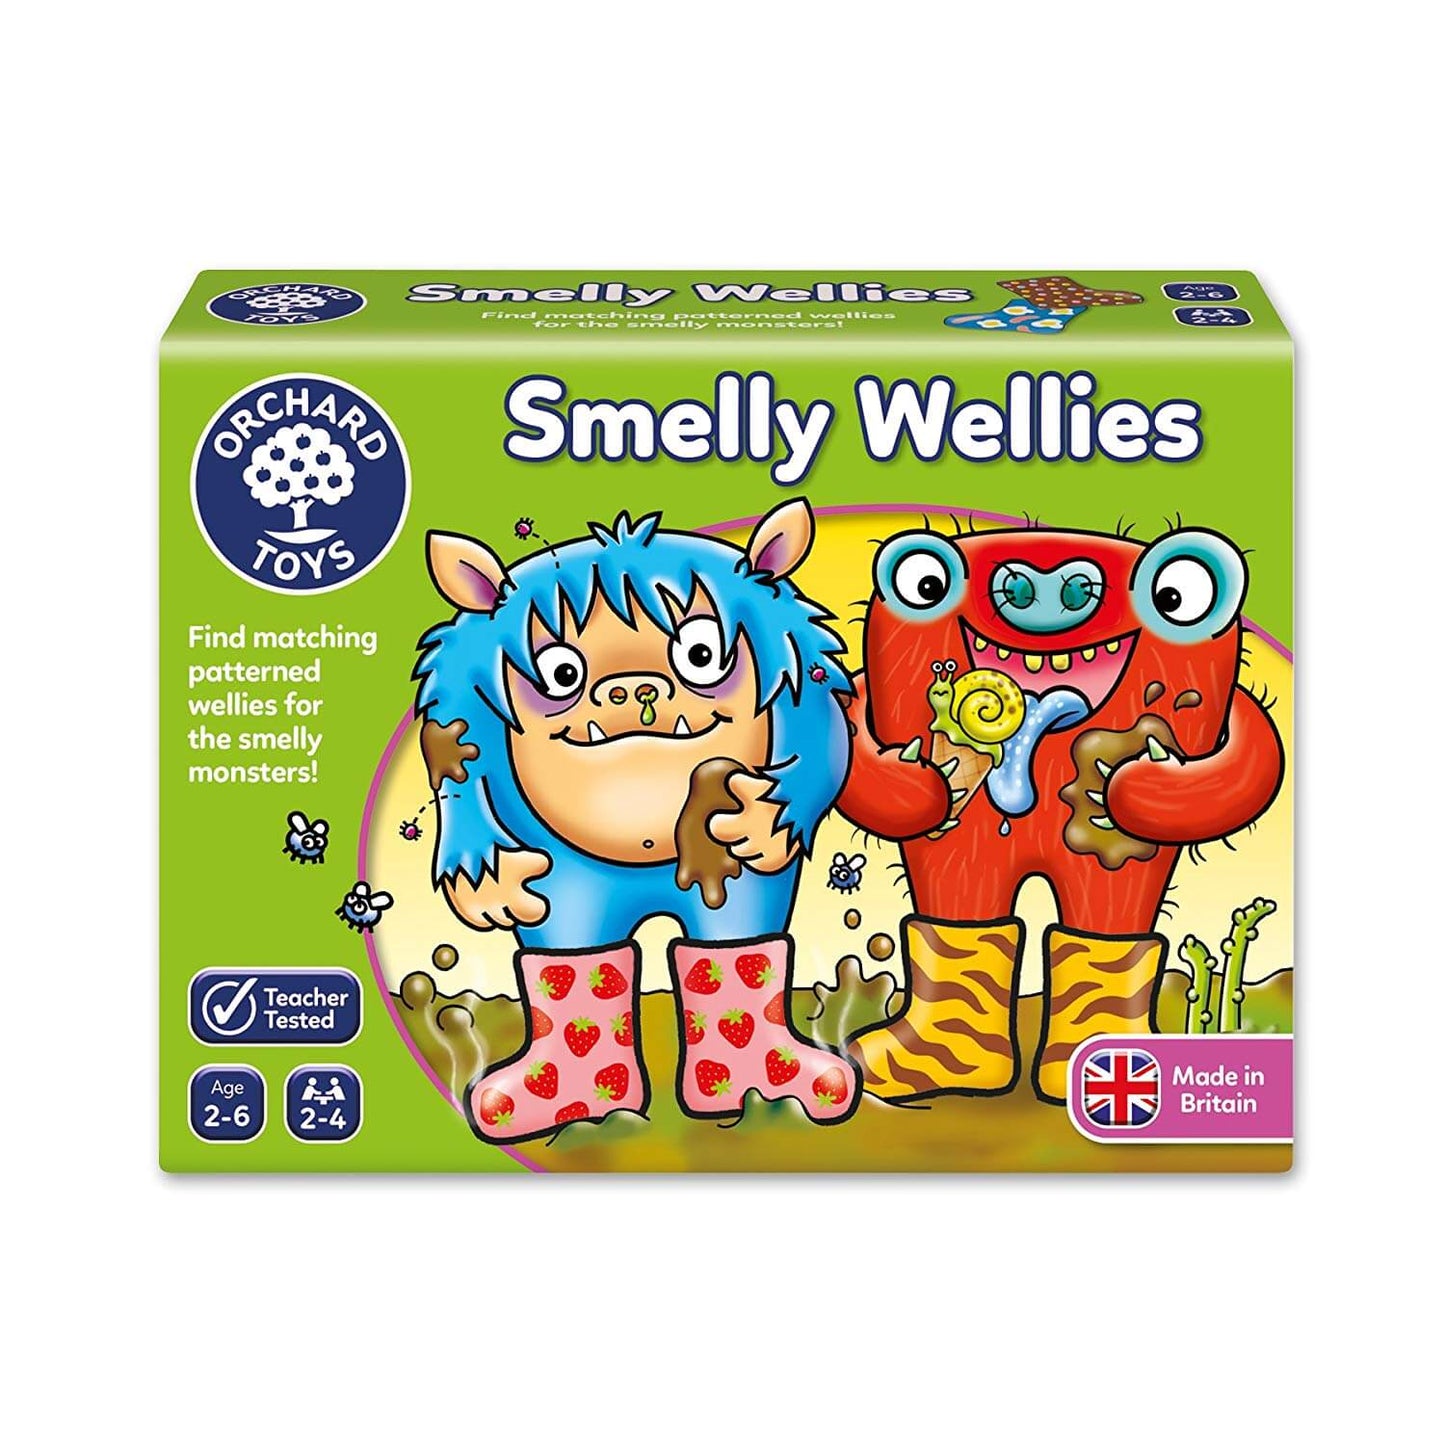 Smelly Wellies Orchard Toys